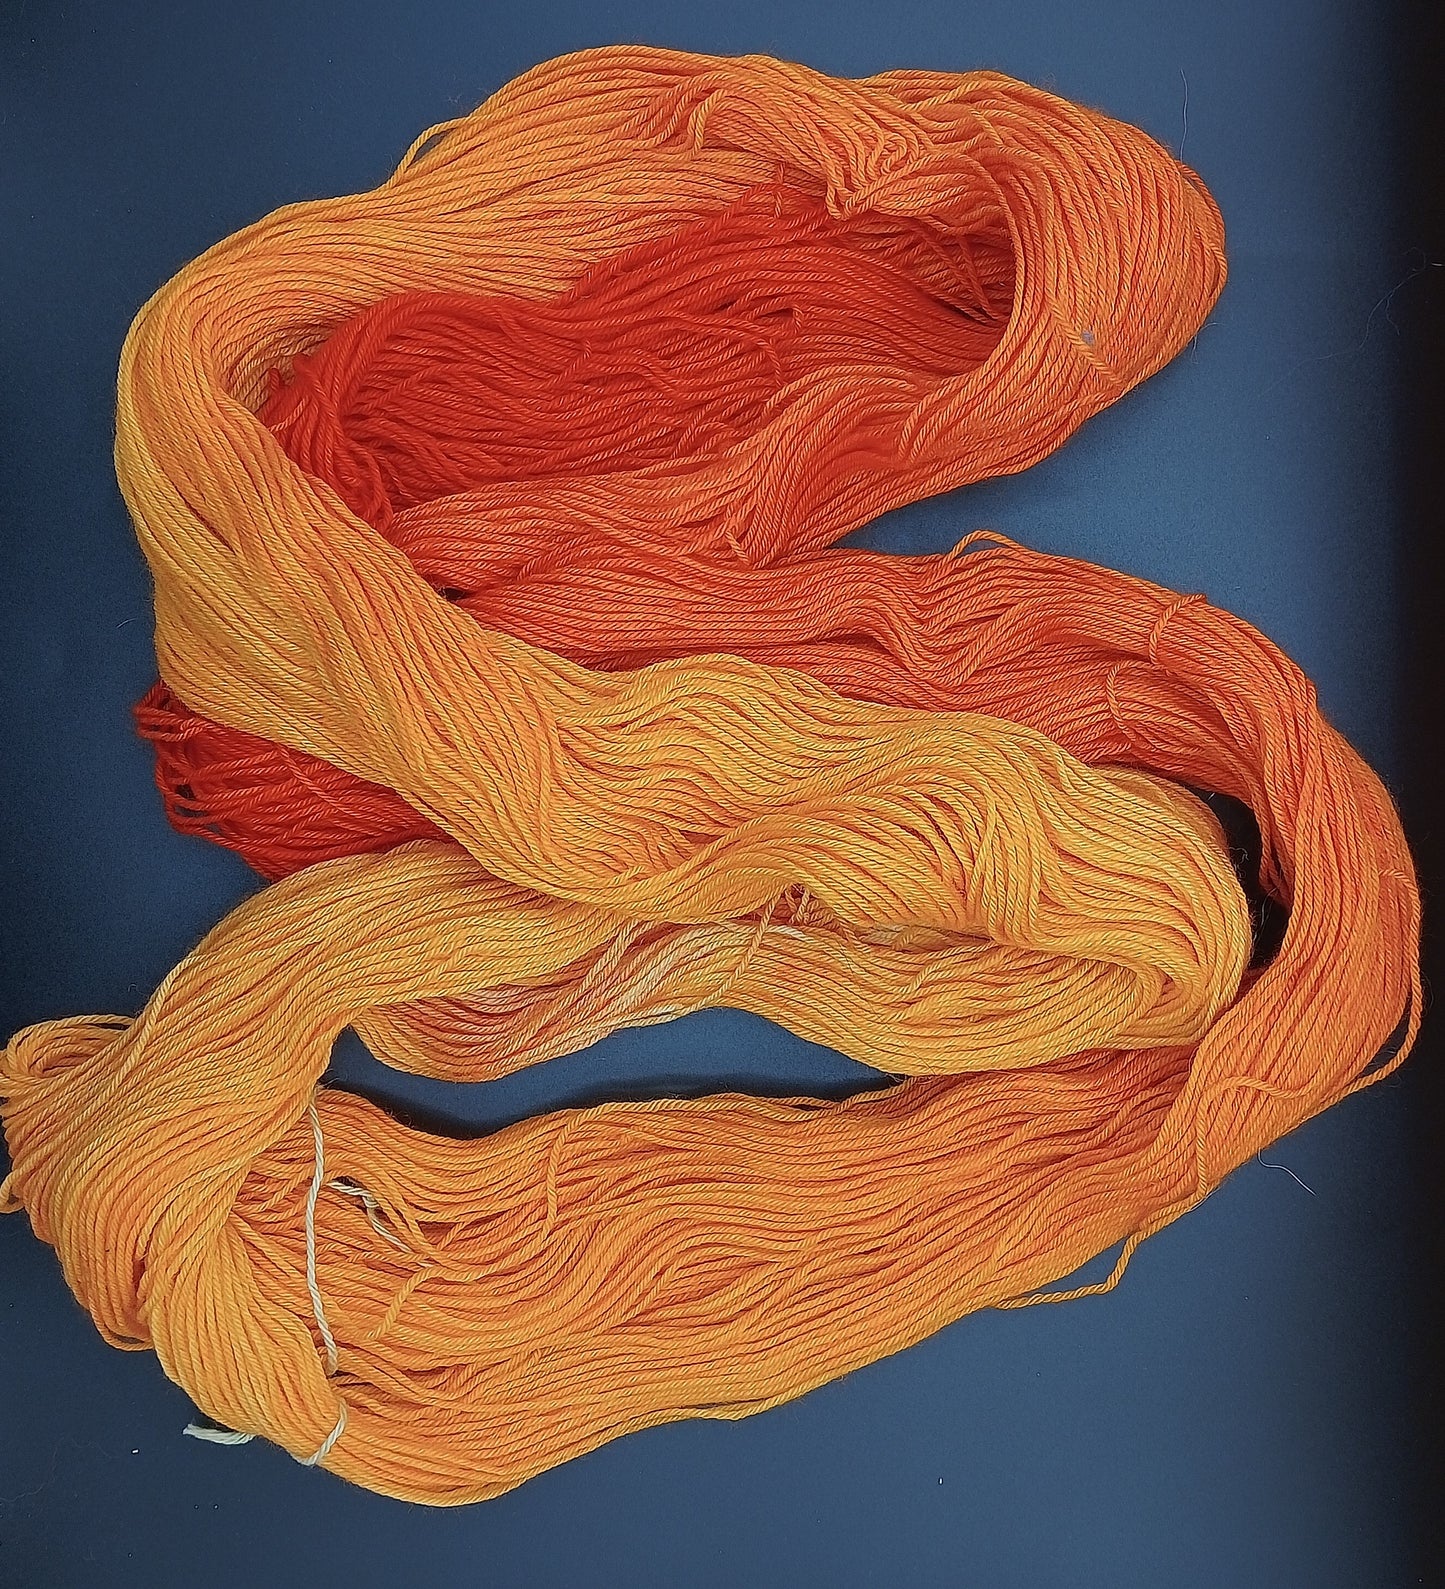 100G hand dyed Bluefaced Leicester/Nylon High Twist sock yarn - "Tequilla Sunrise"